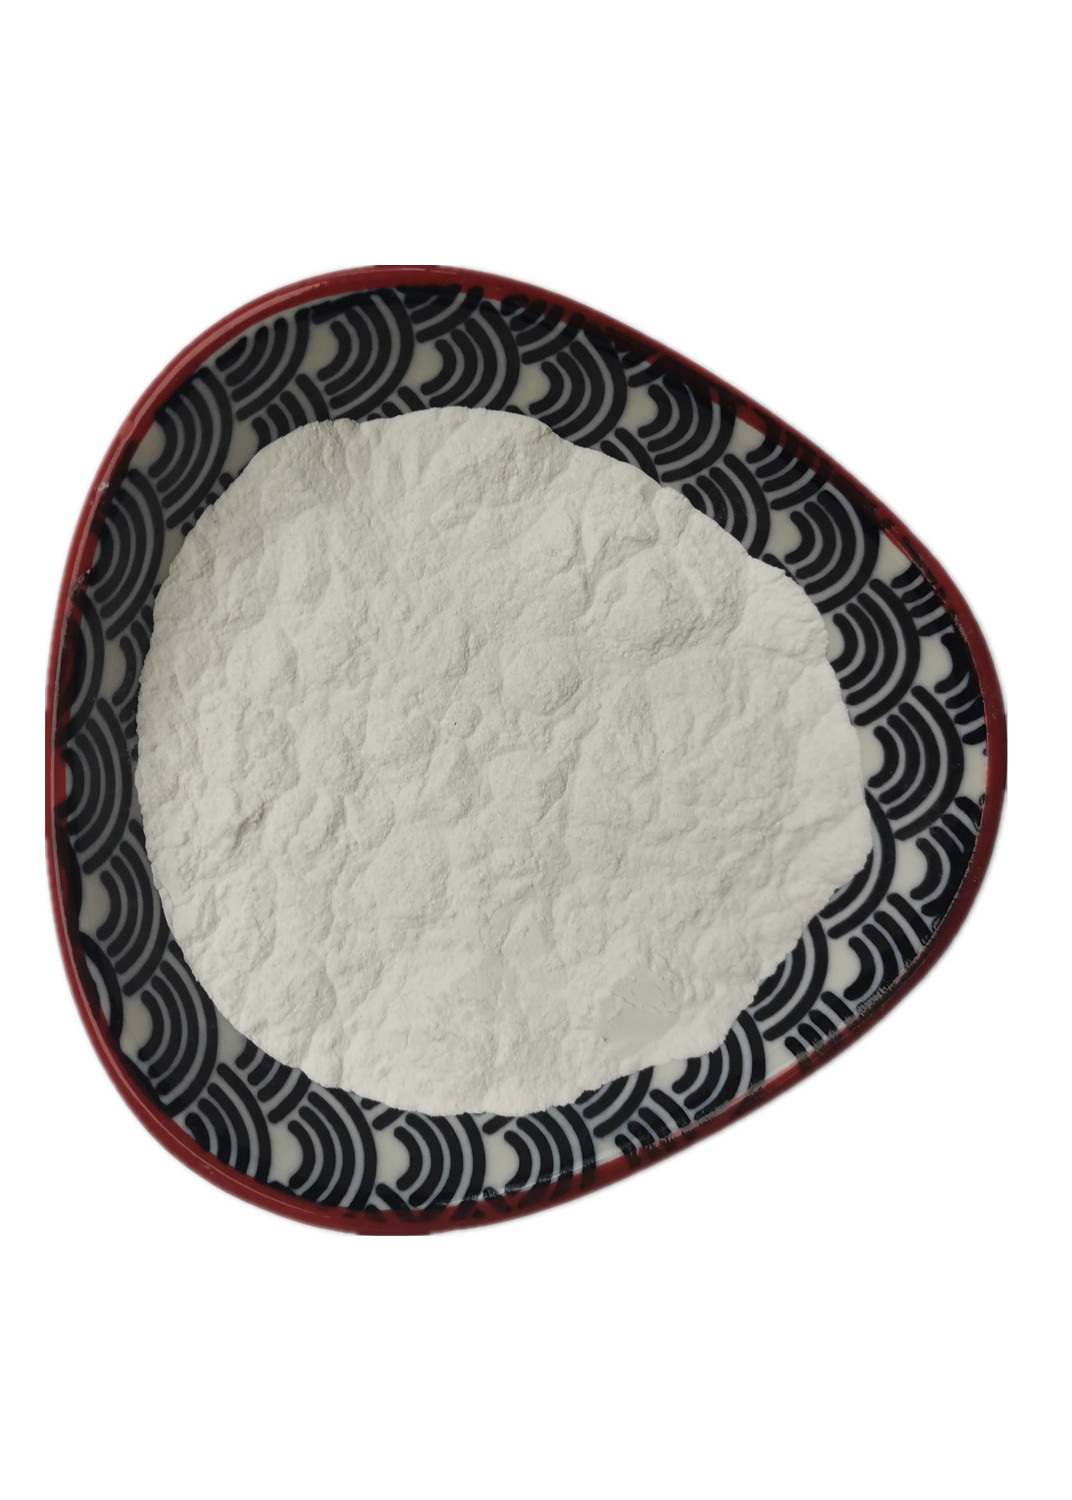 Diatomaceous Earth for syrup